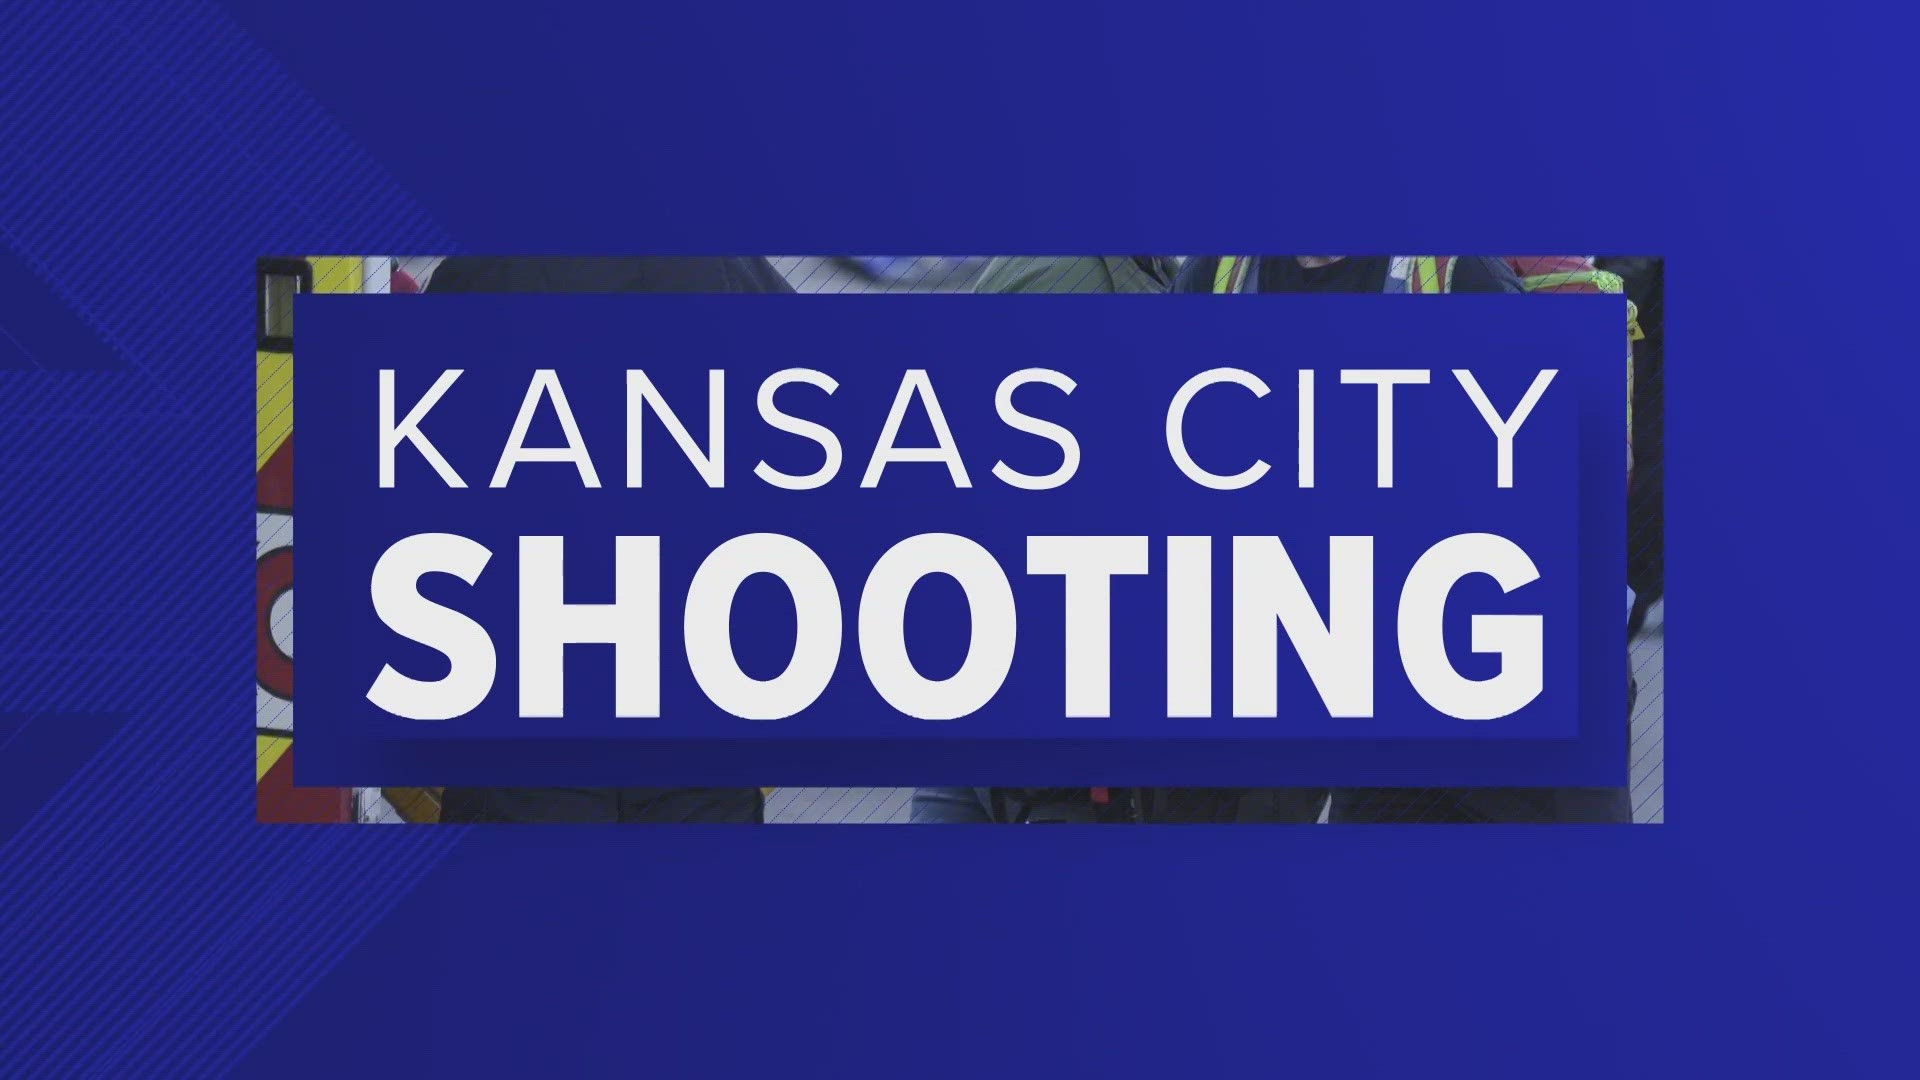 One of the three suspects officers initially arrested was released. Kansas City police say they determined that person was not involved in the shooting.